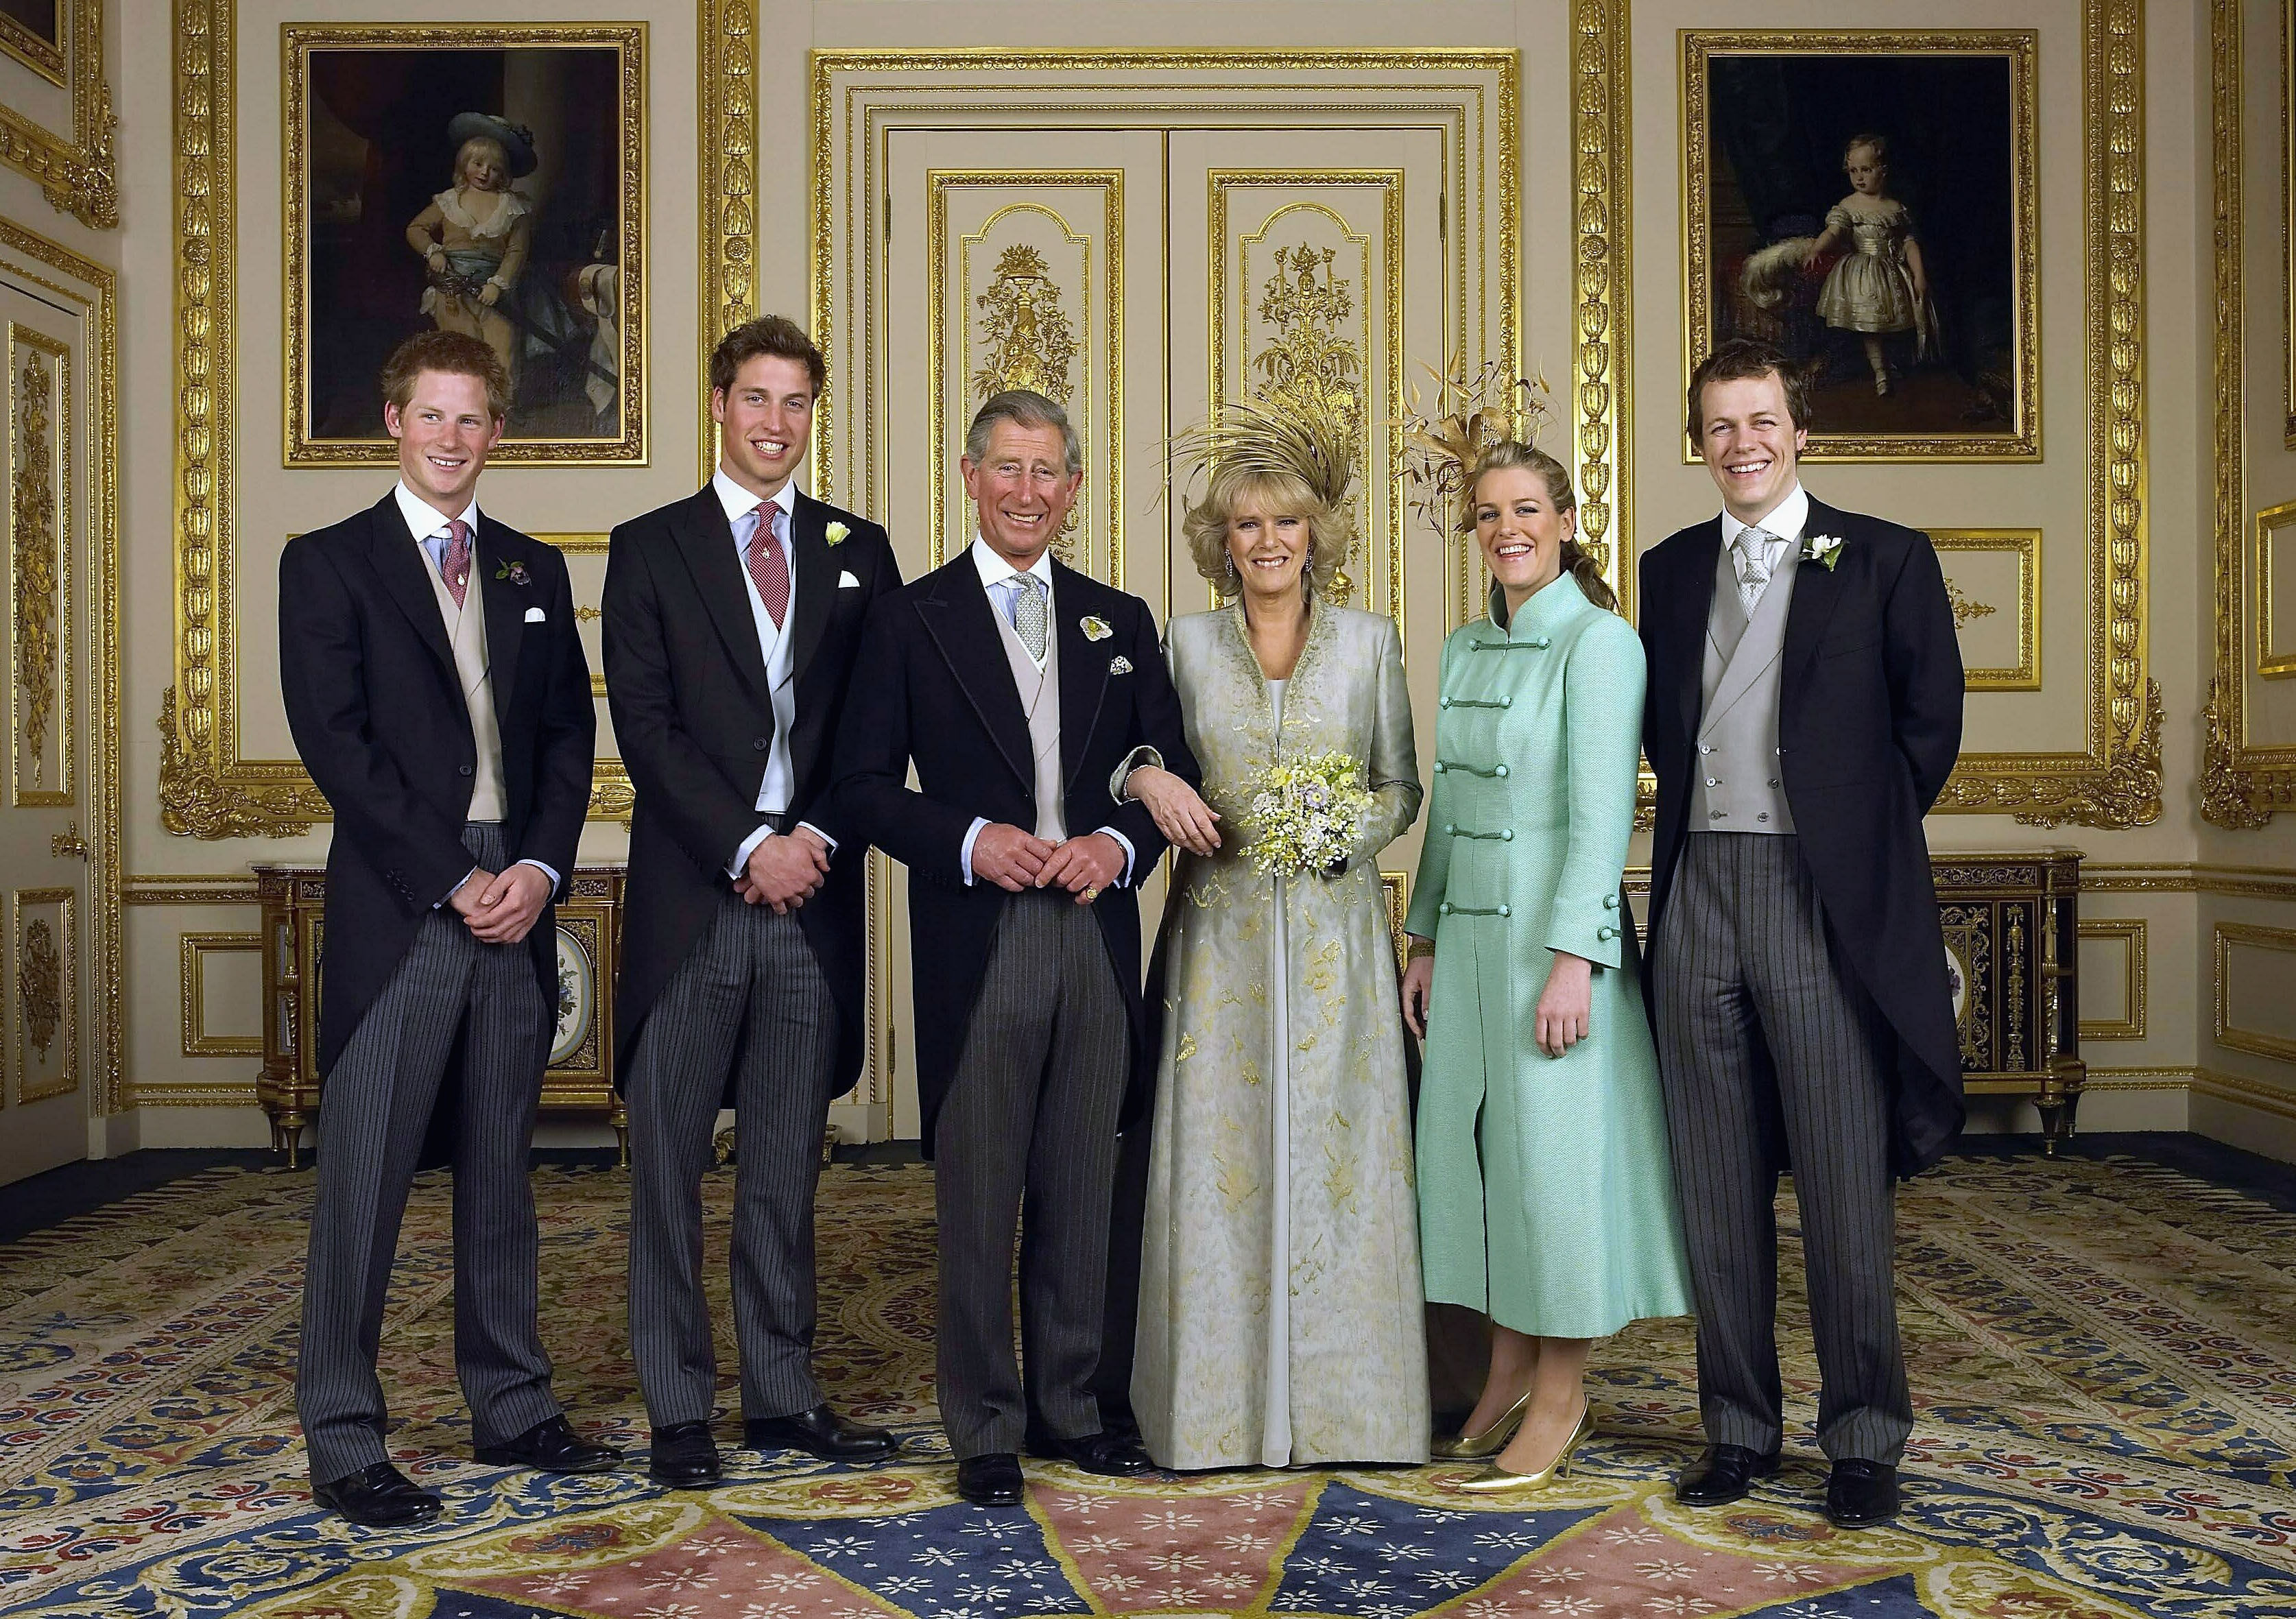 Prince Harry, Prince William, King Charles, Queen Consort Camilla, Laura Parker Bowles and Tom Parker Bowles represent Britain’s modern family. Photo: Getty Images